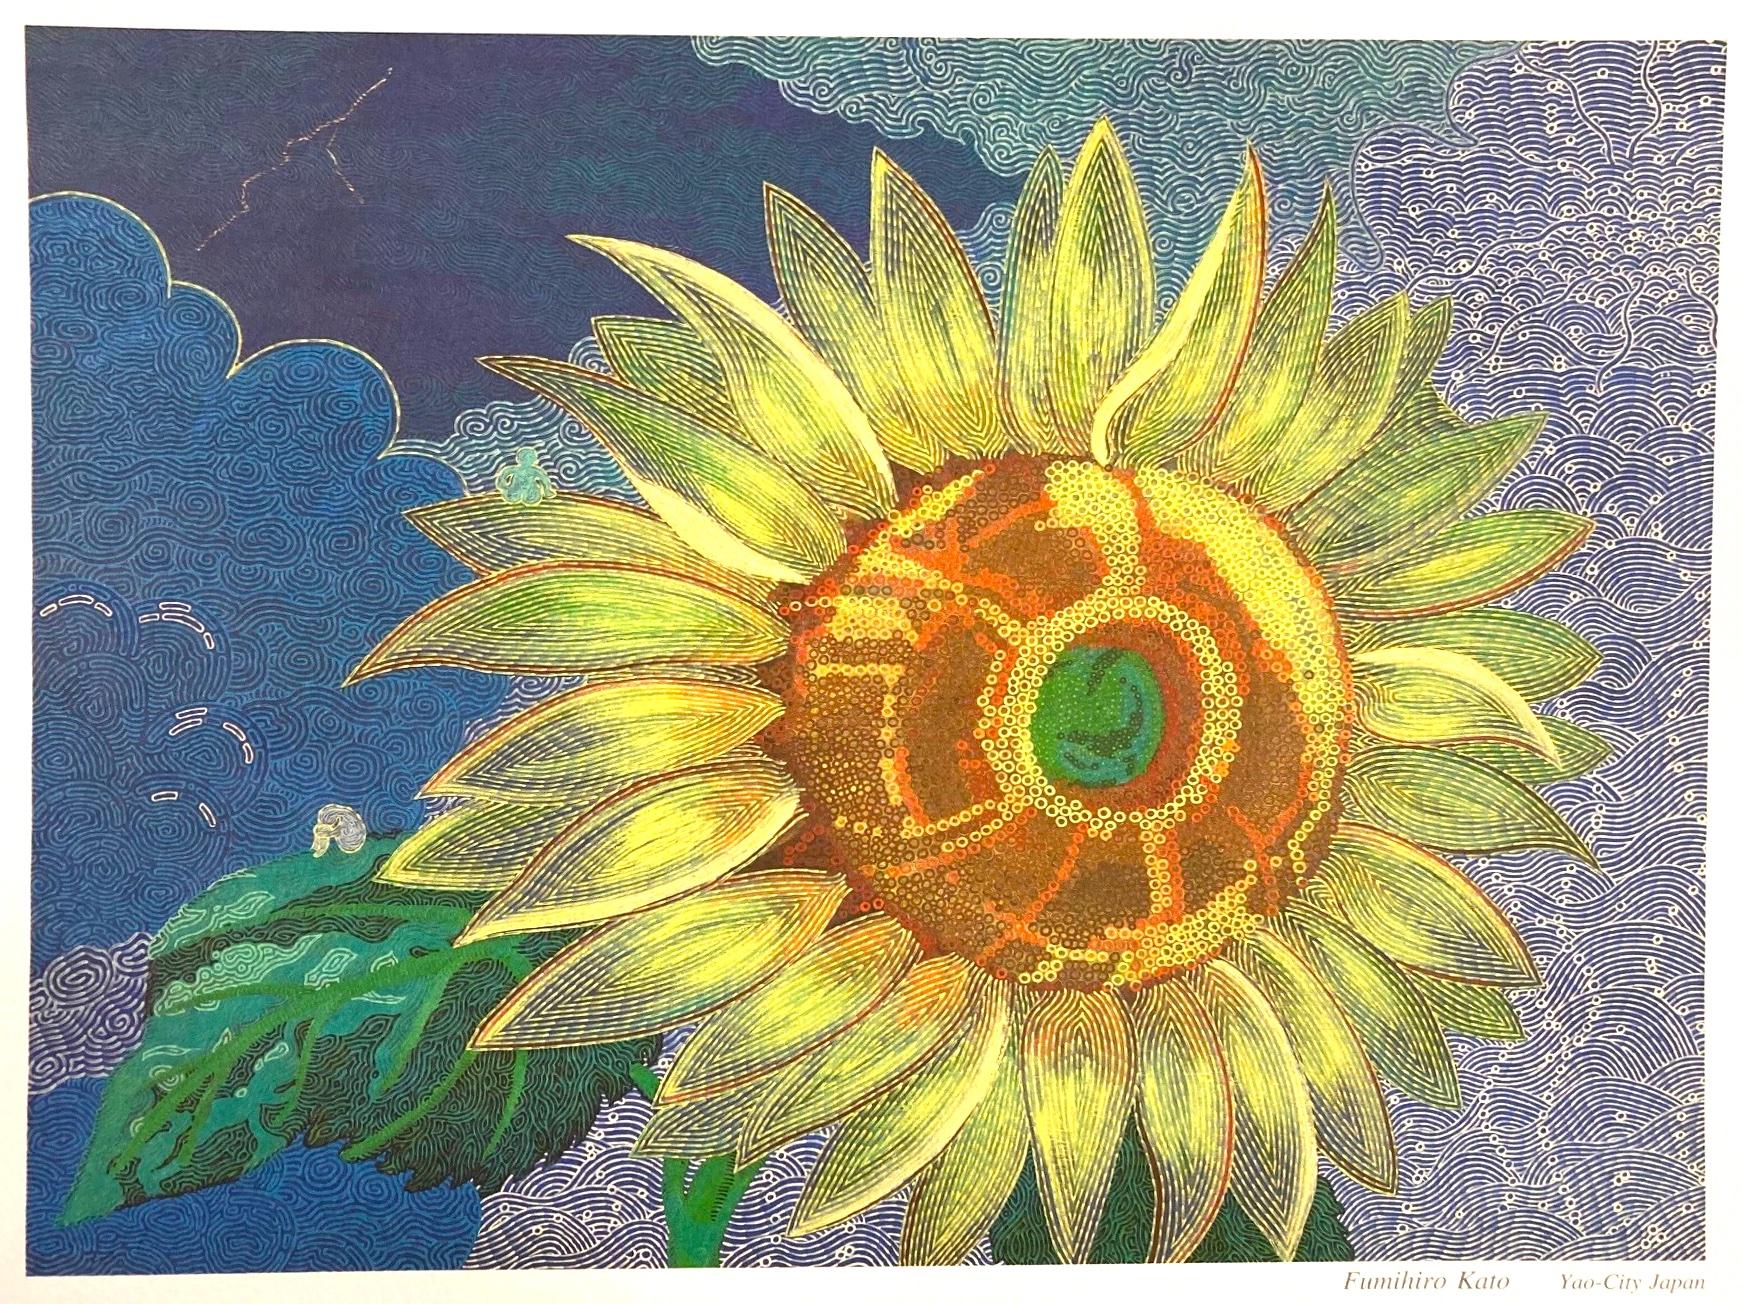 Fumihiro Kato Abstract Print - Untitled (3): Contemporary print depicting a sunflower